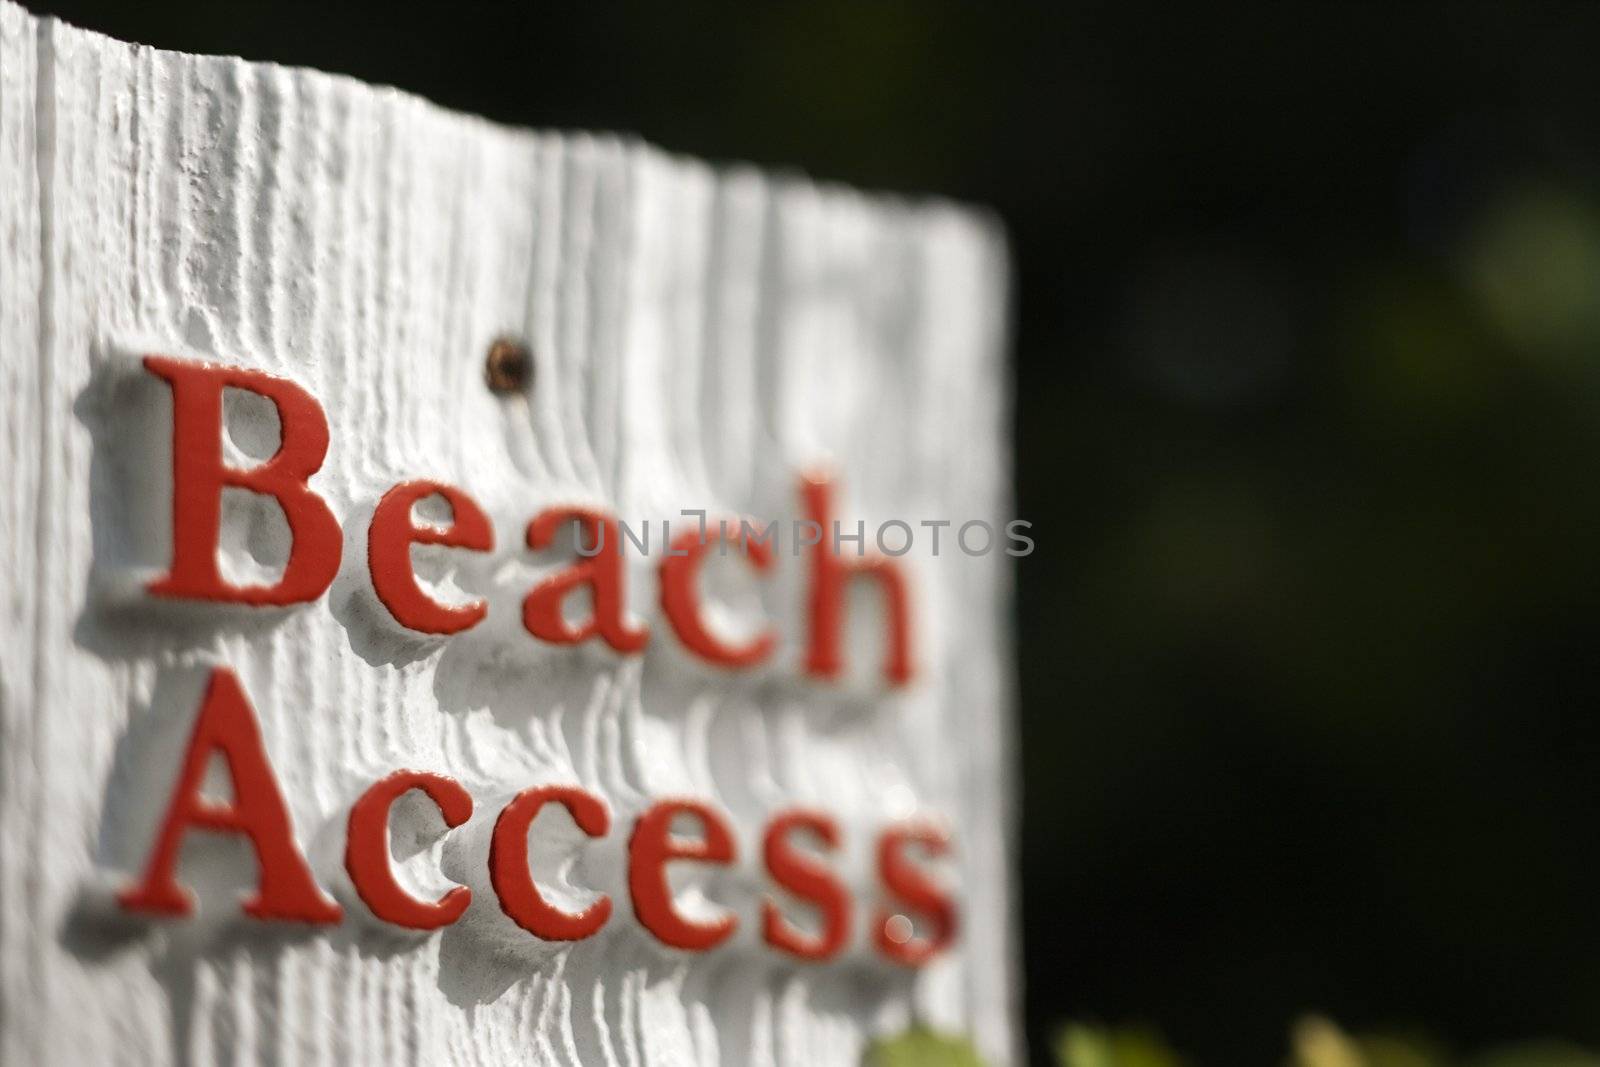 Beach access sign. by iofoto